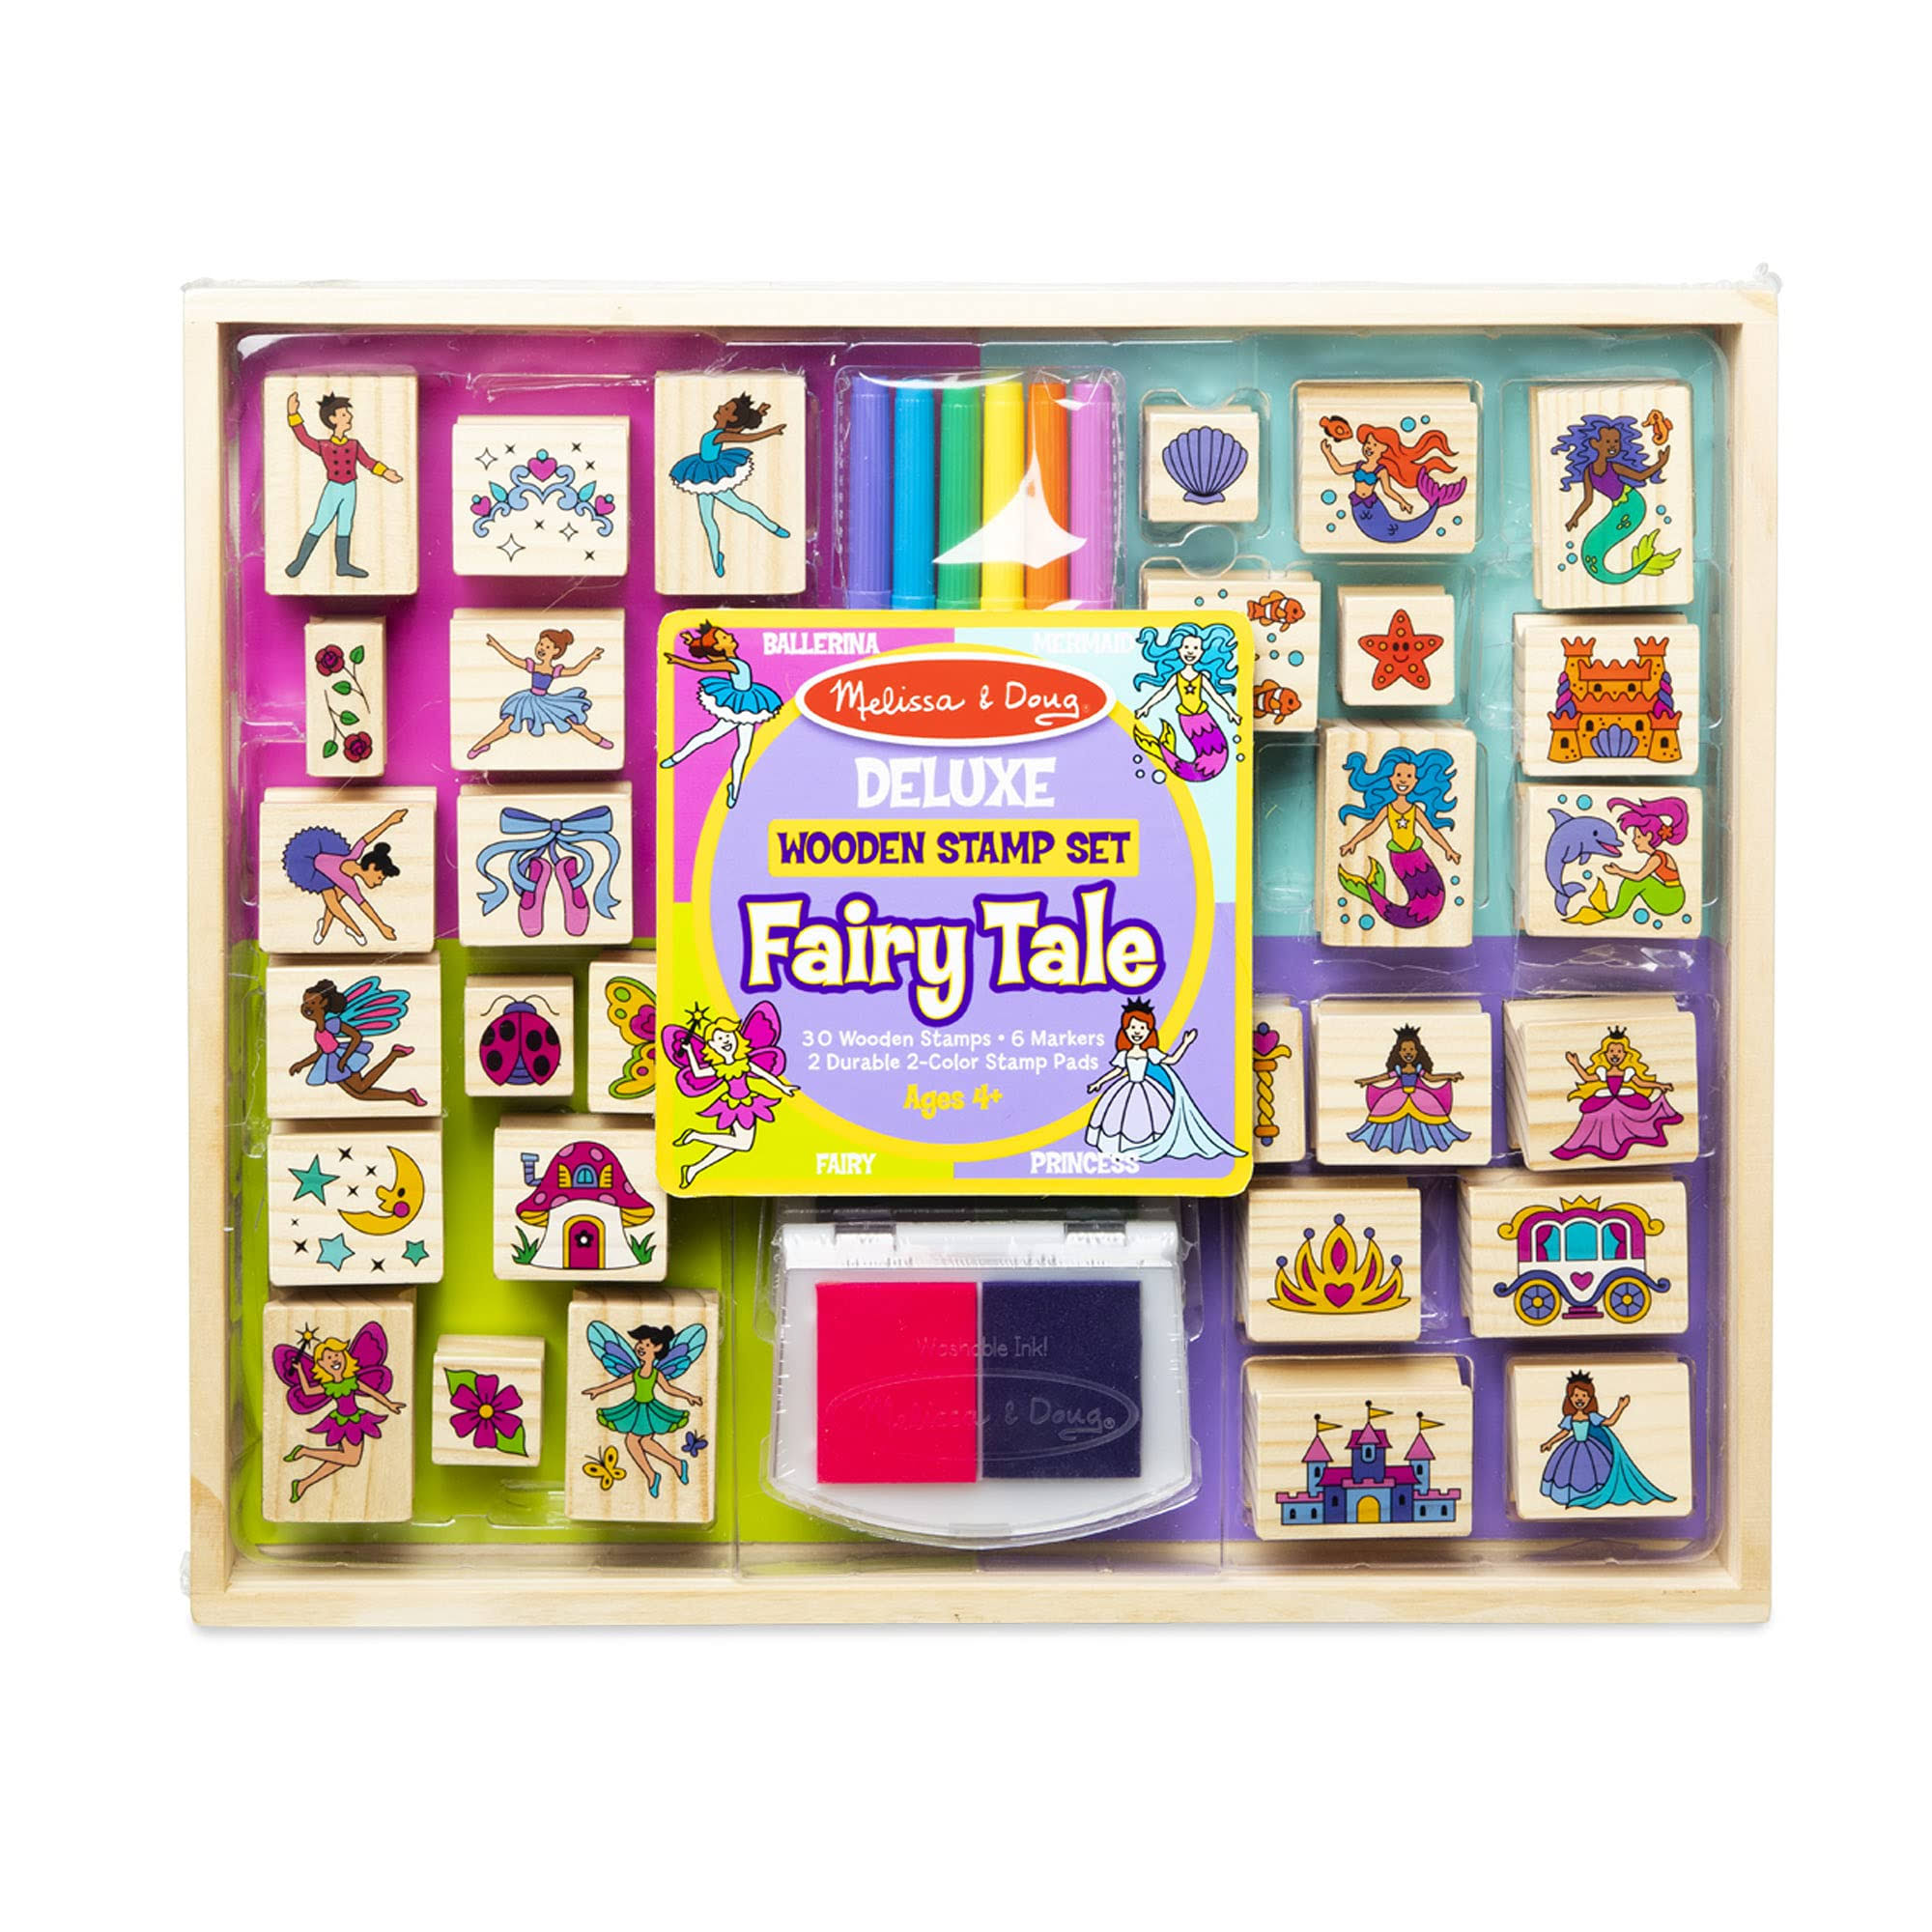 Deluxe Wooden Stamp Set - Fairy Tale by Melissa & Doug